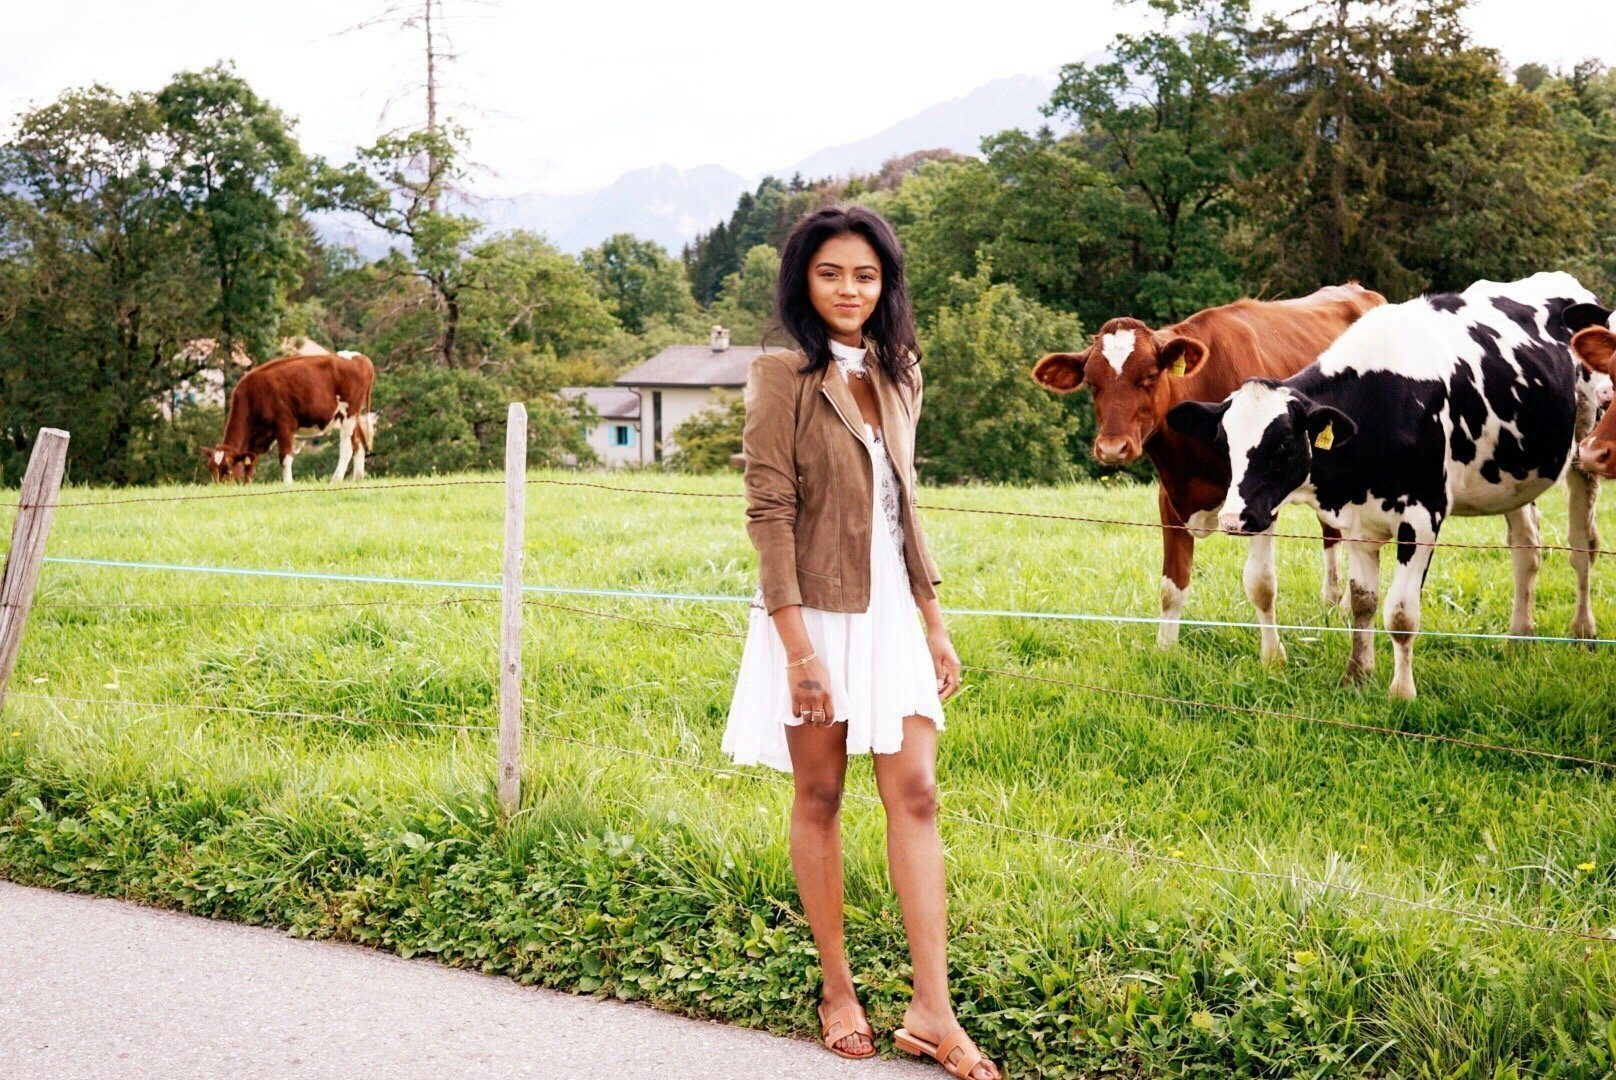 Sachini wearing a brown jacket and white dress in an outdoor environment with cows